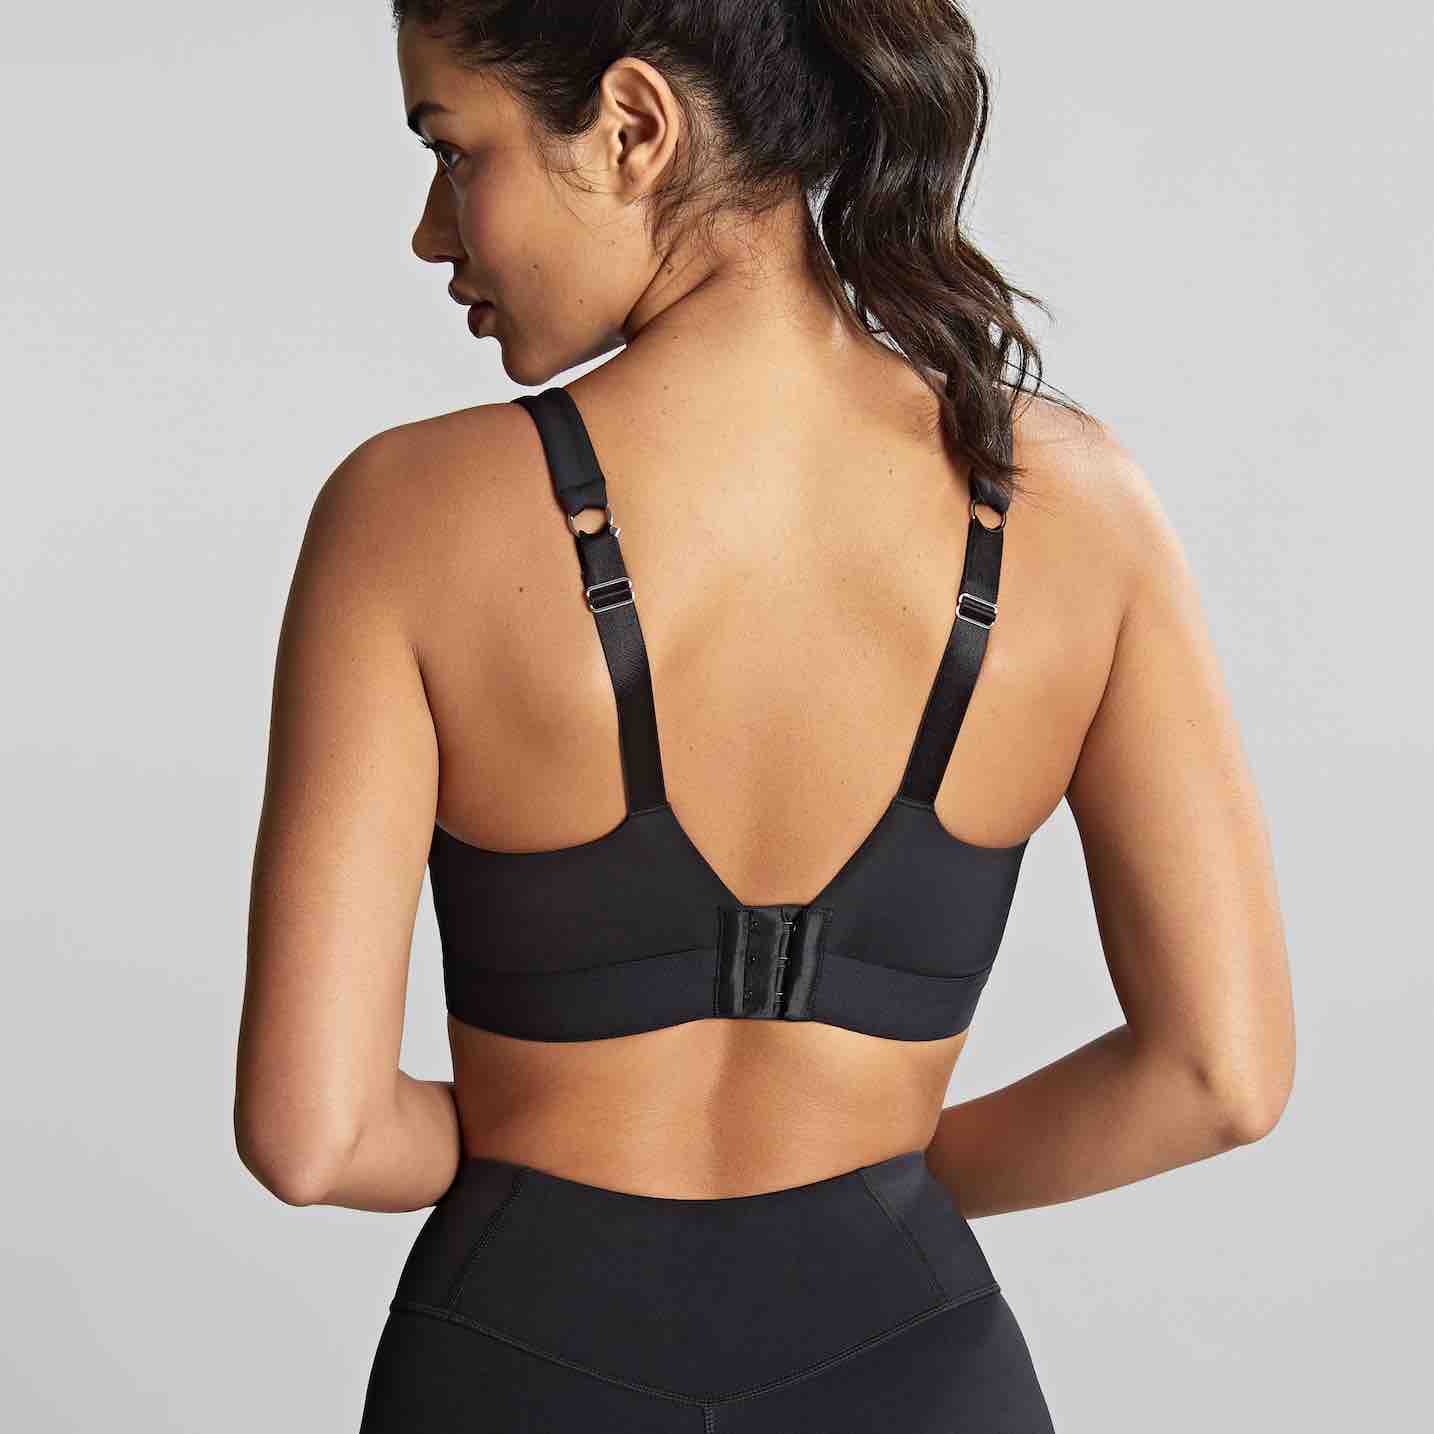 12 nursing sports bras that will work for your new curves - Today's Parent